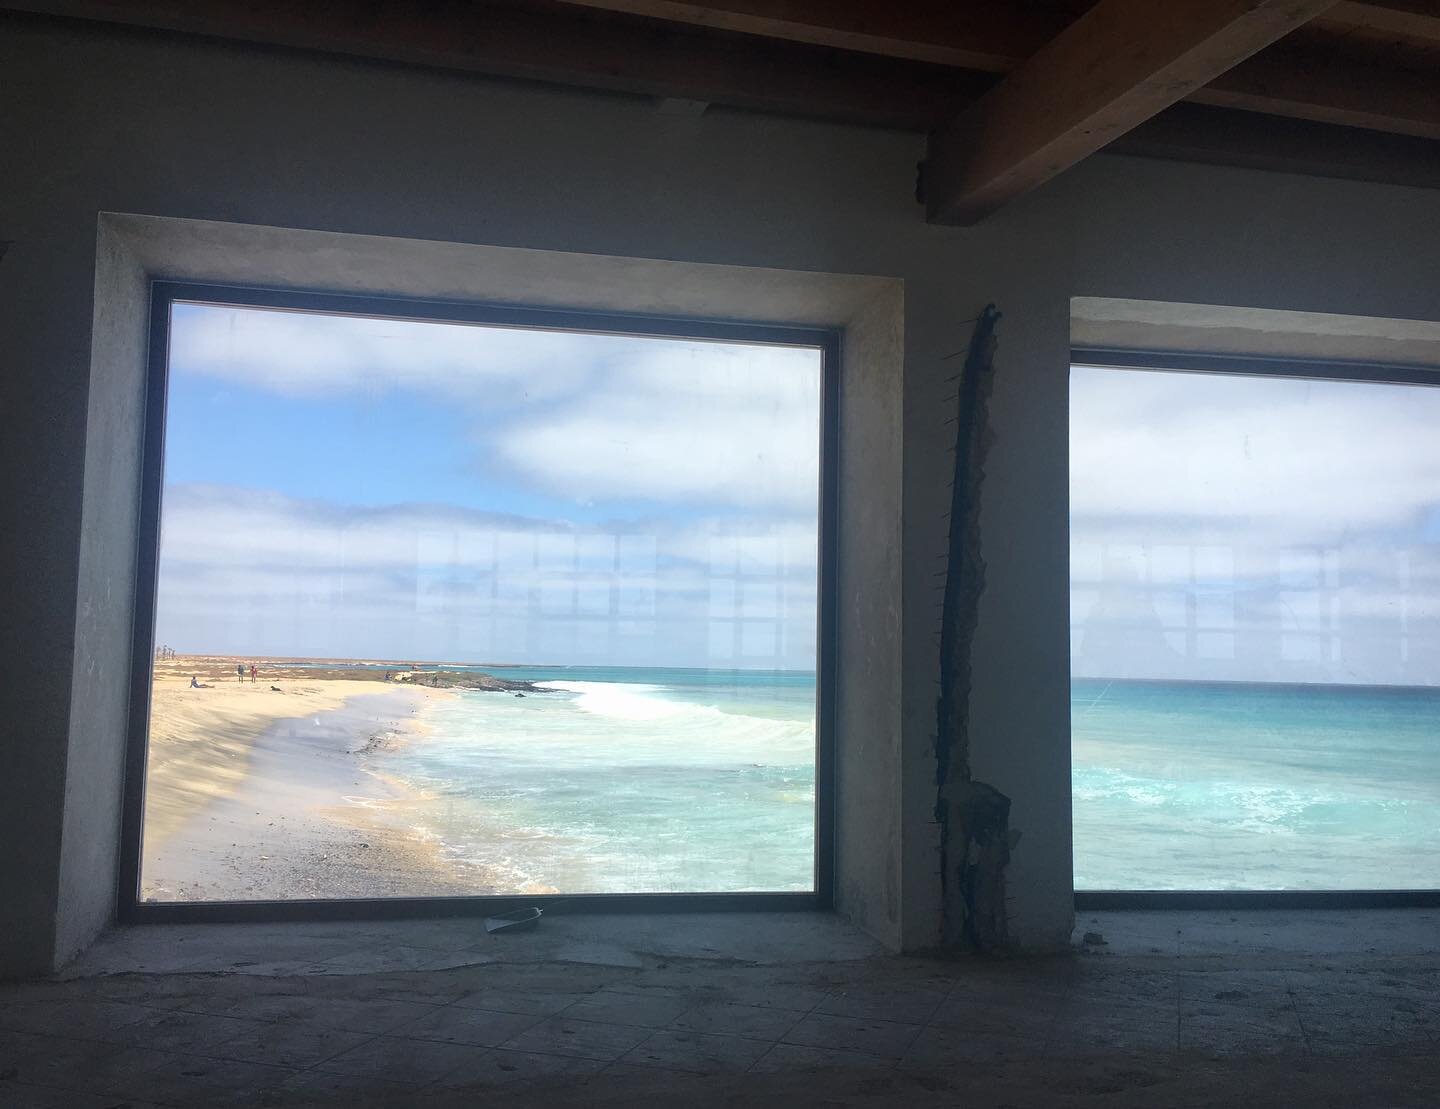 New windows along the left wall of the restaurant, with stunning views down the beach...